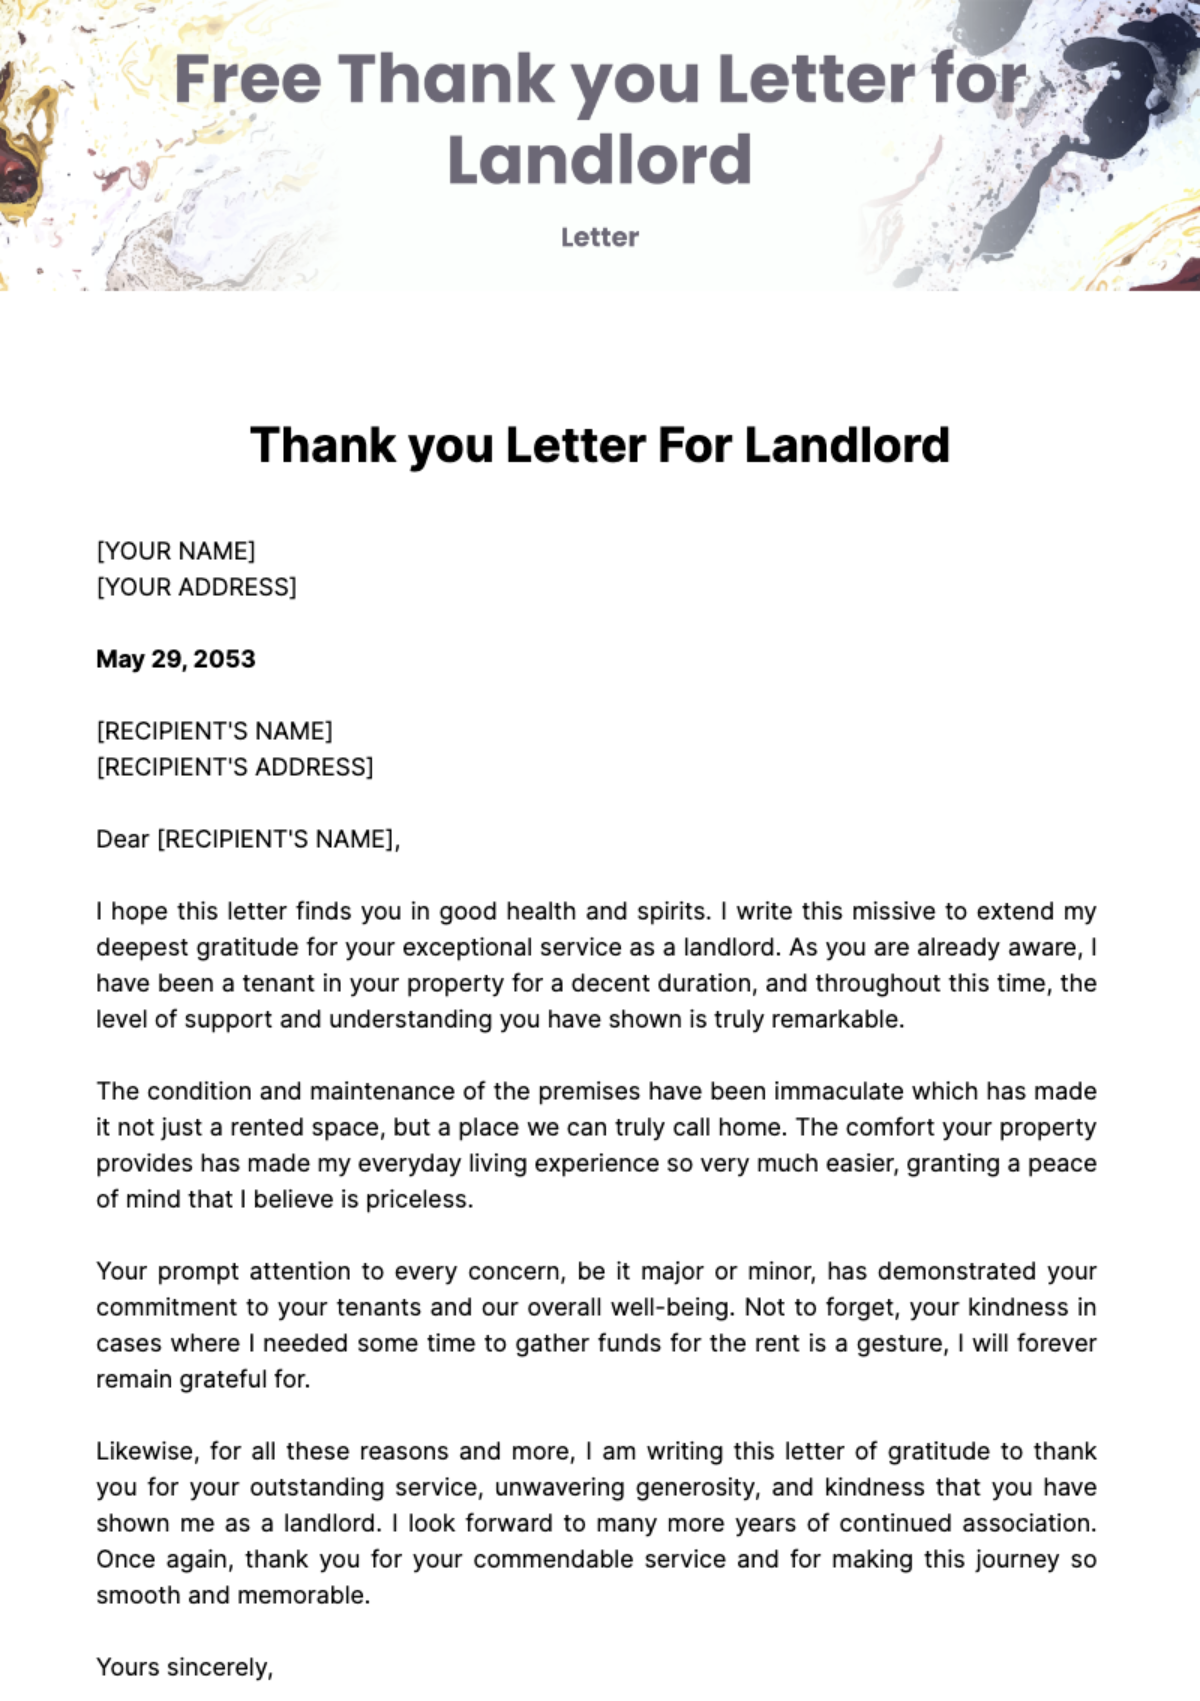 Free Thank you Letter for Landlord Template